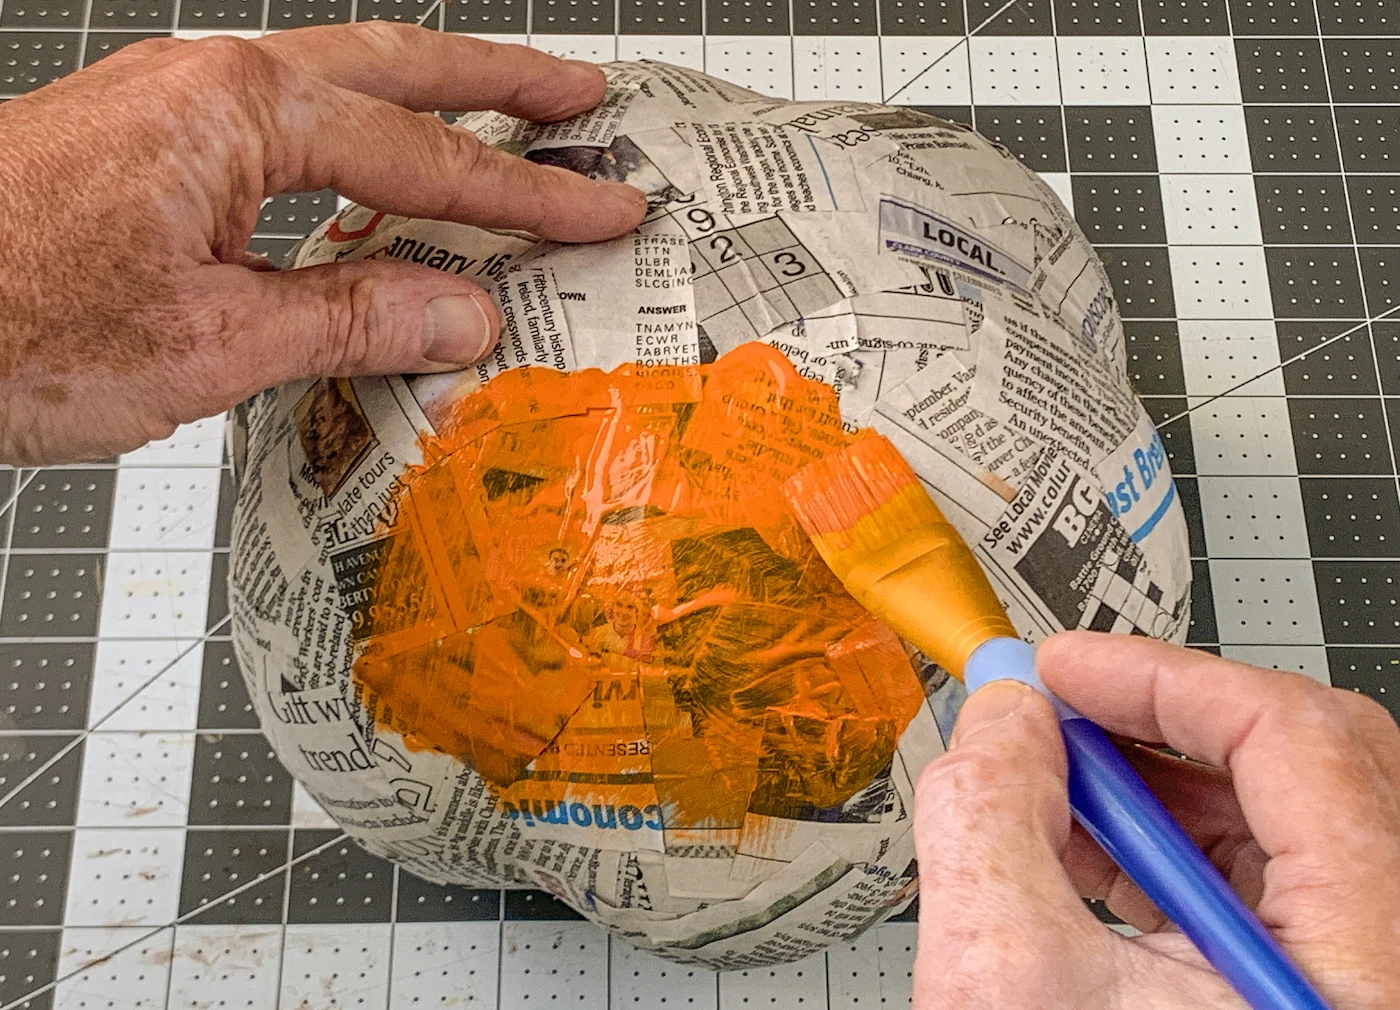 Painting a first layer of orange paint on the pumpkin